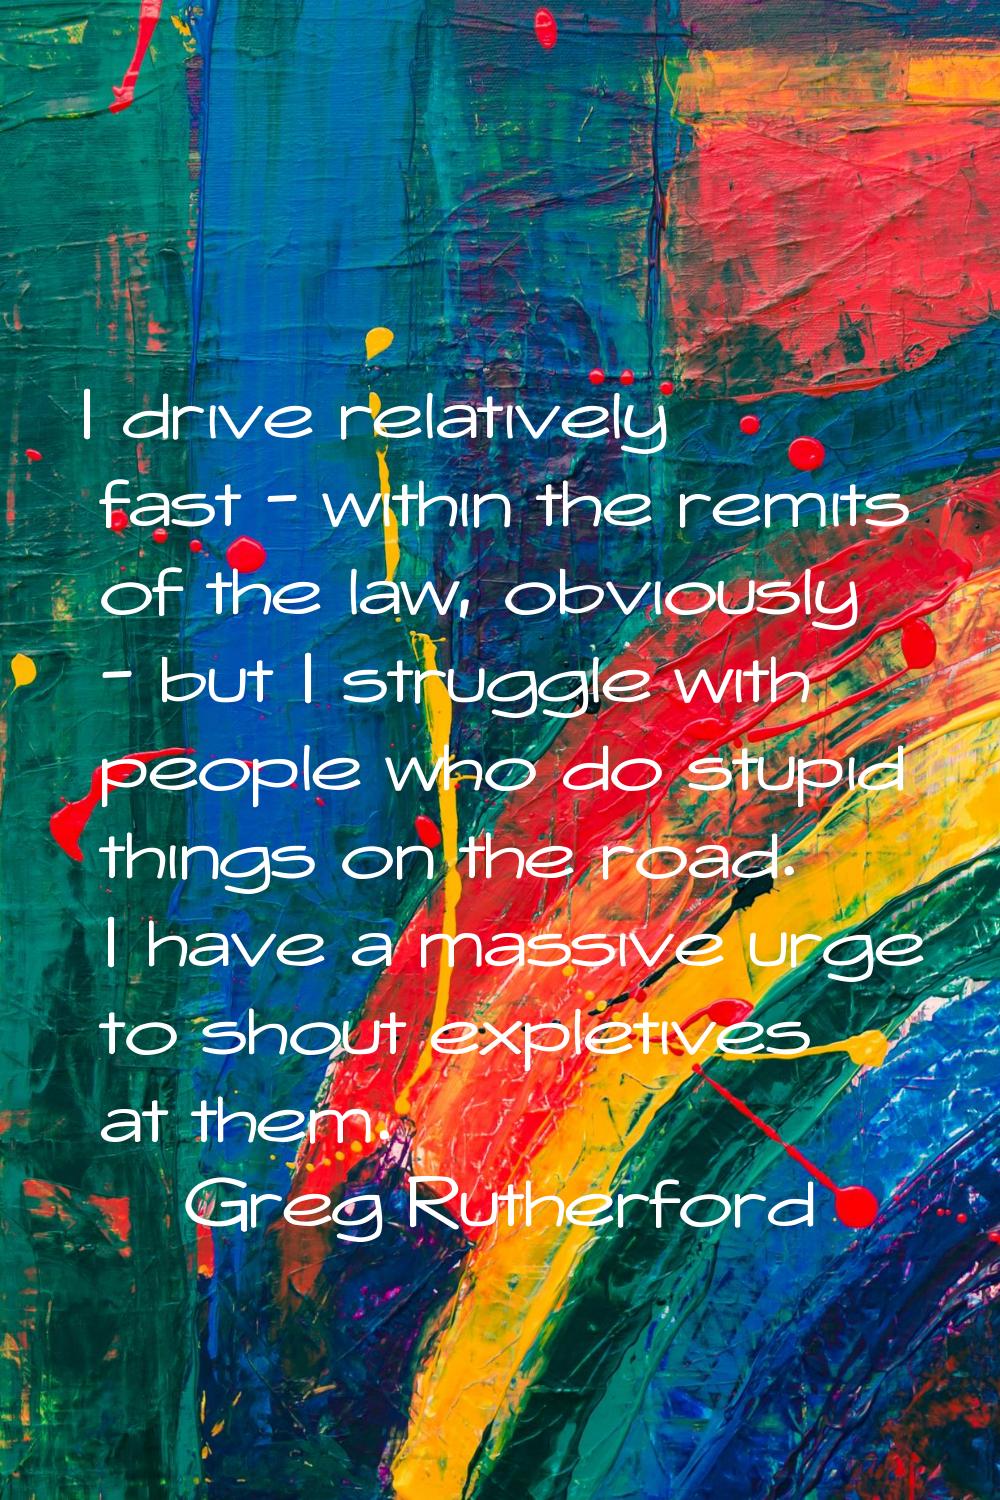 I drive relatively fast - within the remits of the law, obviously - but I struggle with people who 